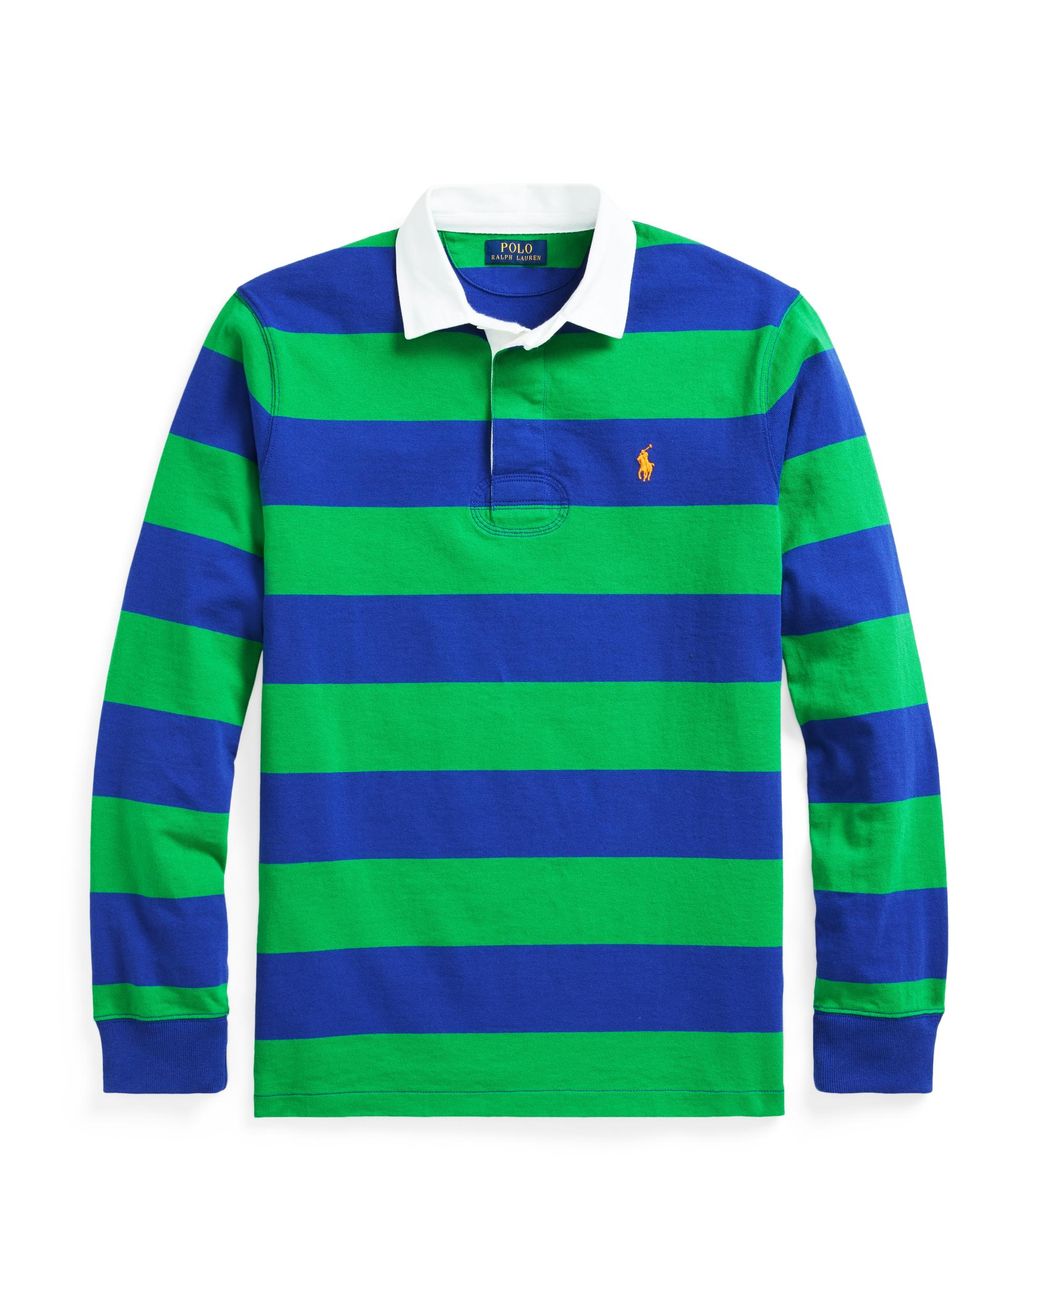 Polo Ralph Lauren Rubber The Iconic Rugby Shirt in Green for Men - Lyst